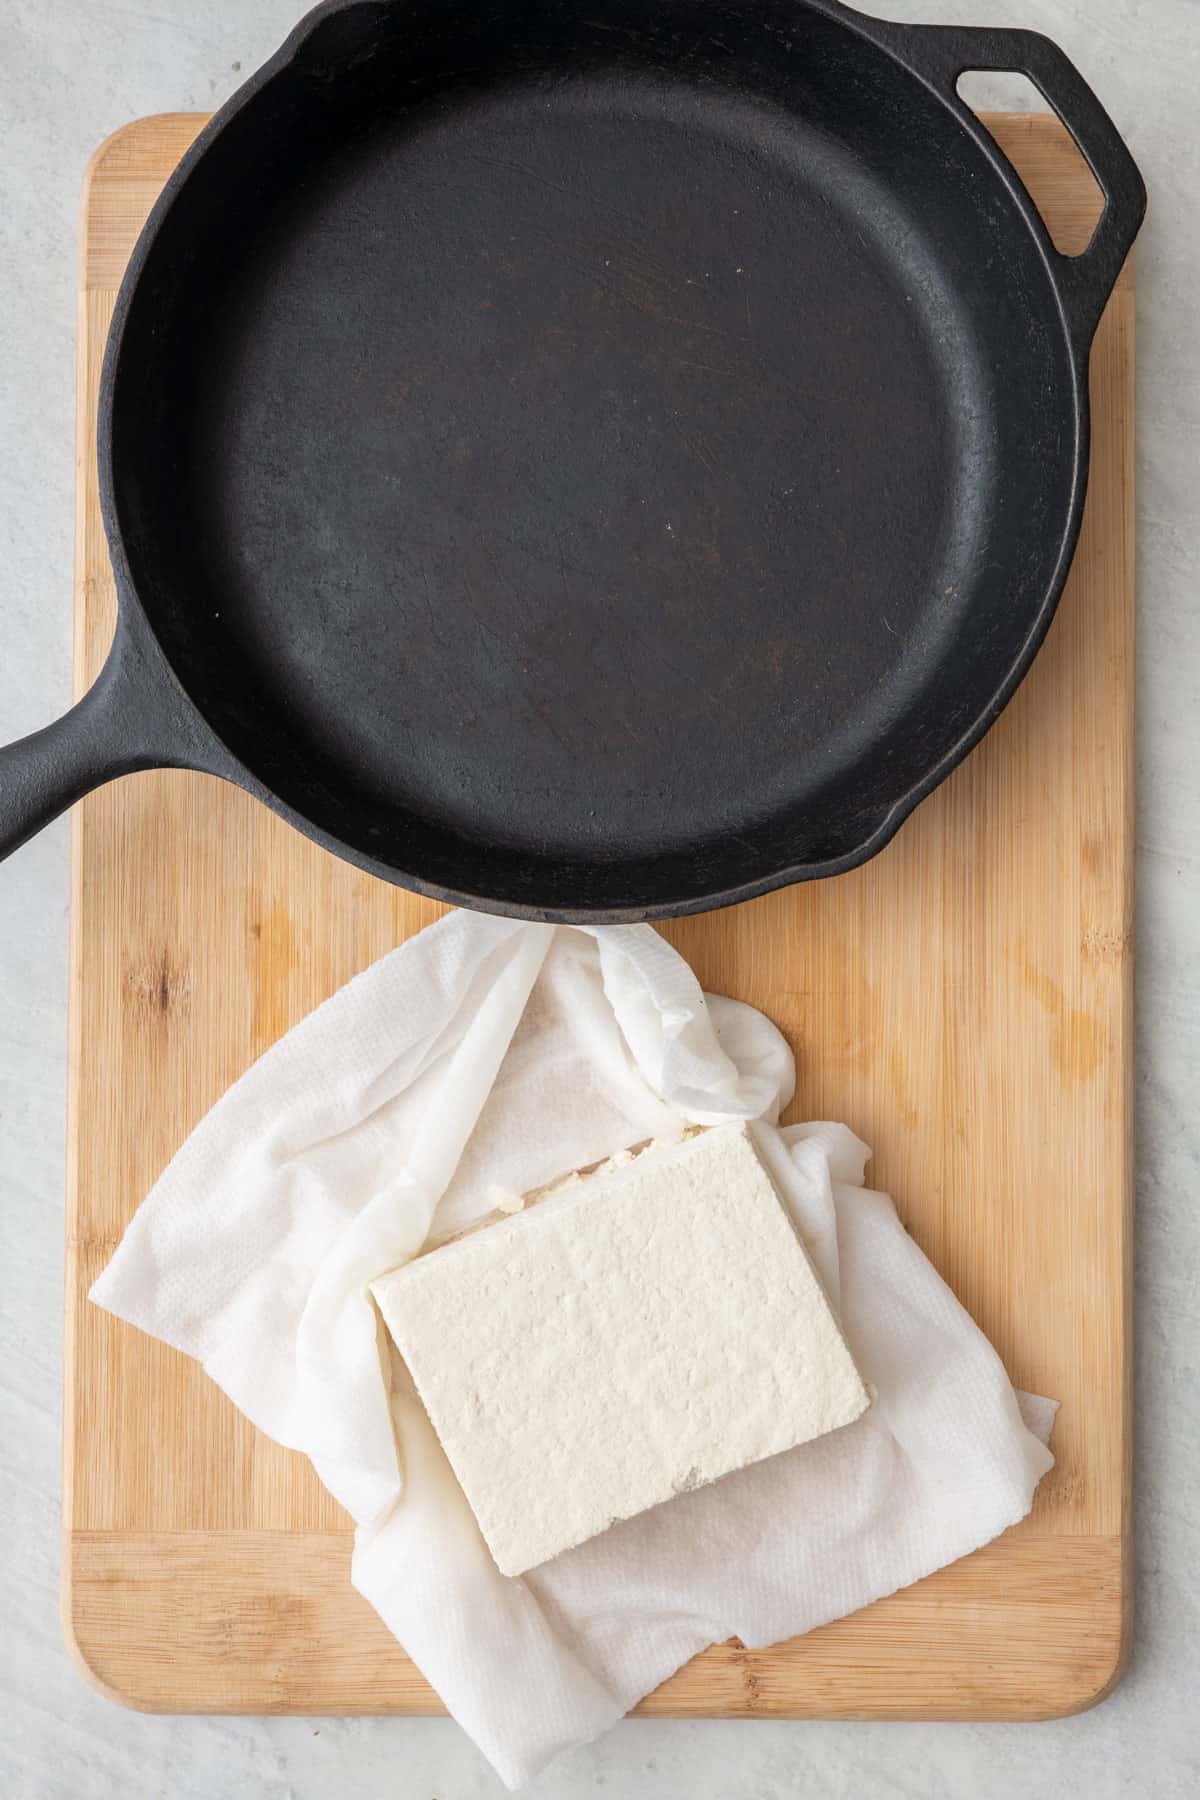 Block of tofu sitting on top of paper towels next to a cast iron skillet on cutting board.